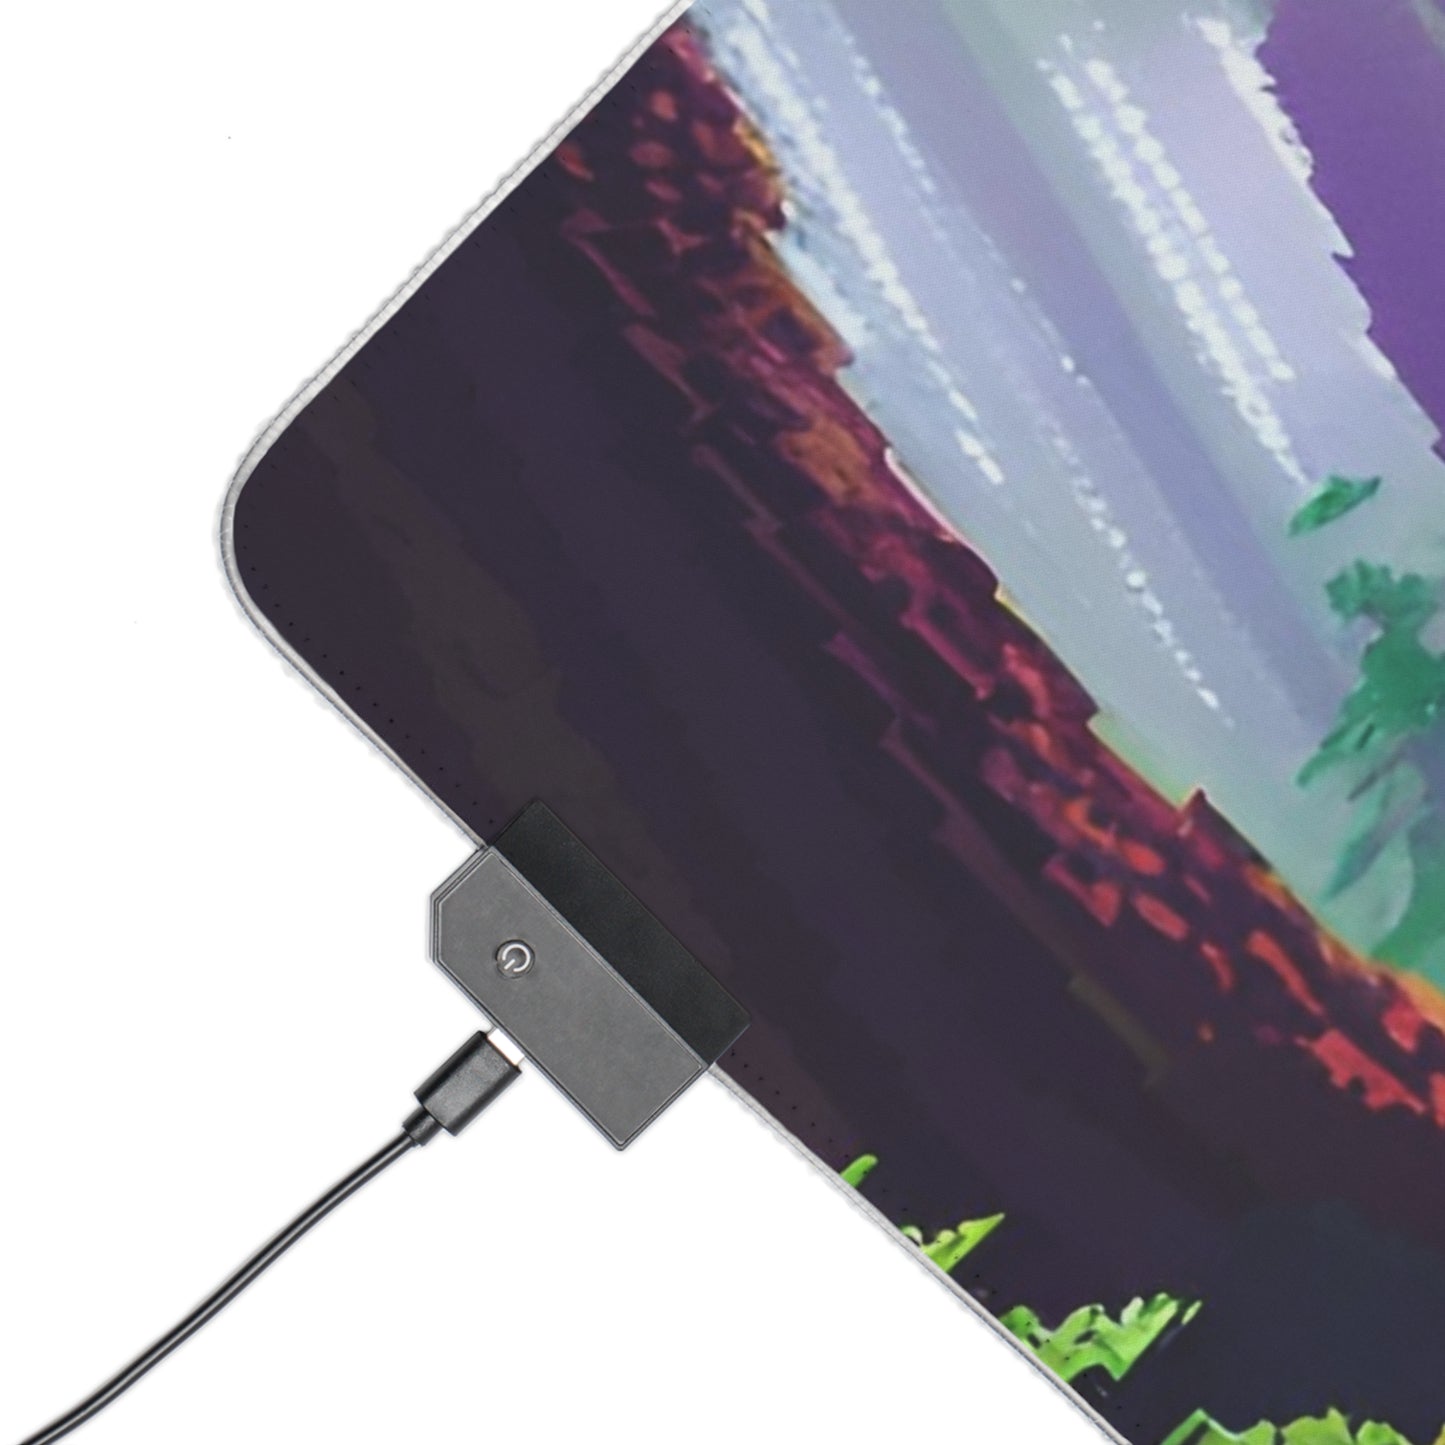 Pixel forest 01 LED Gaming Mouse Pad